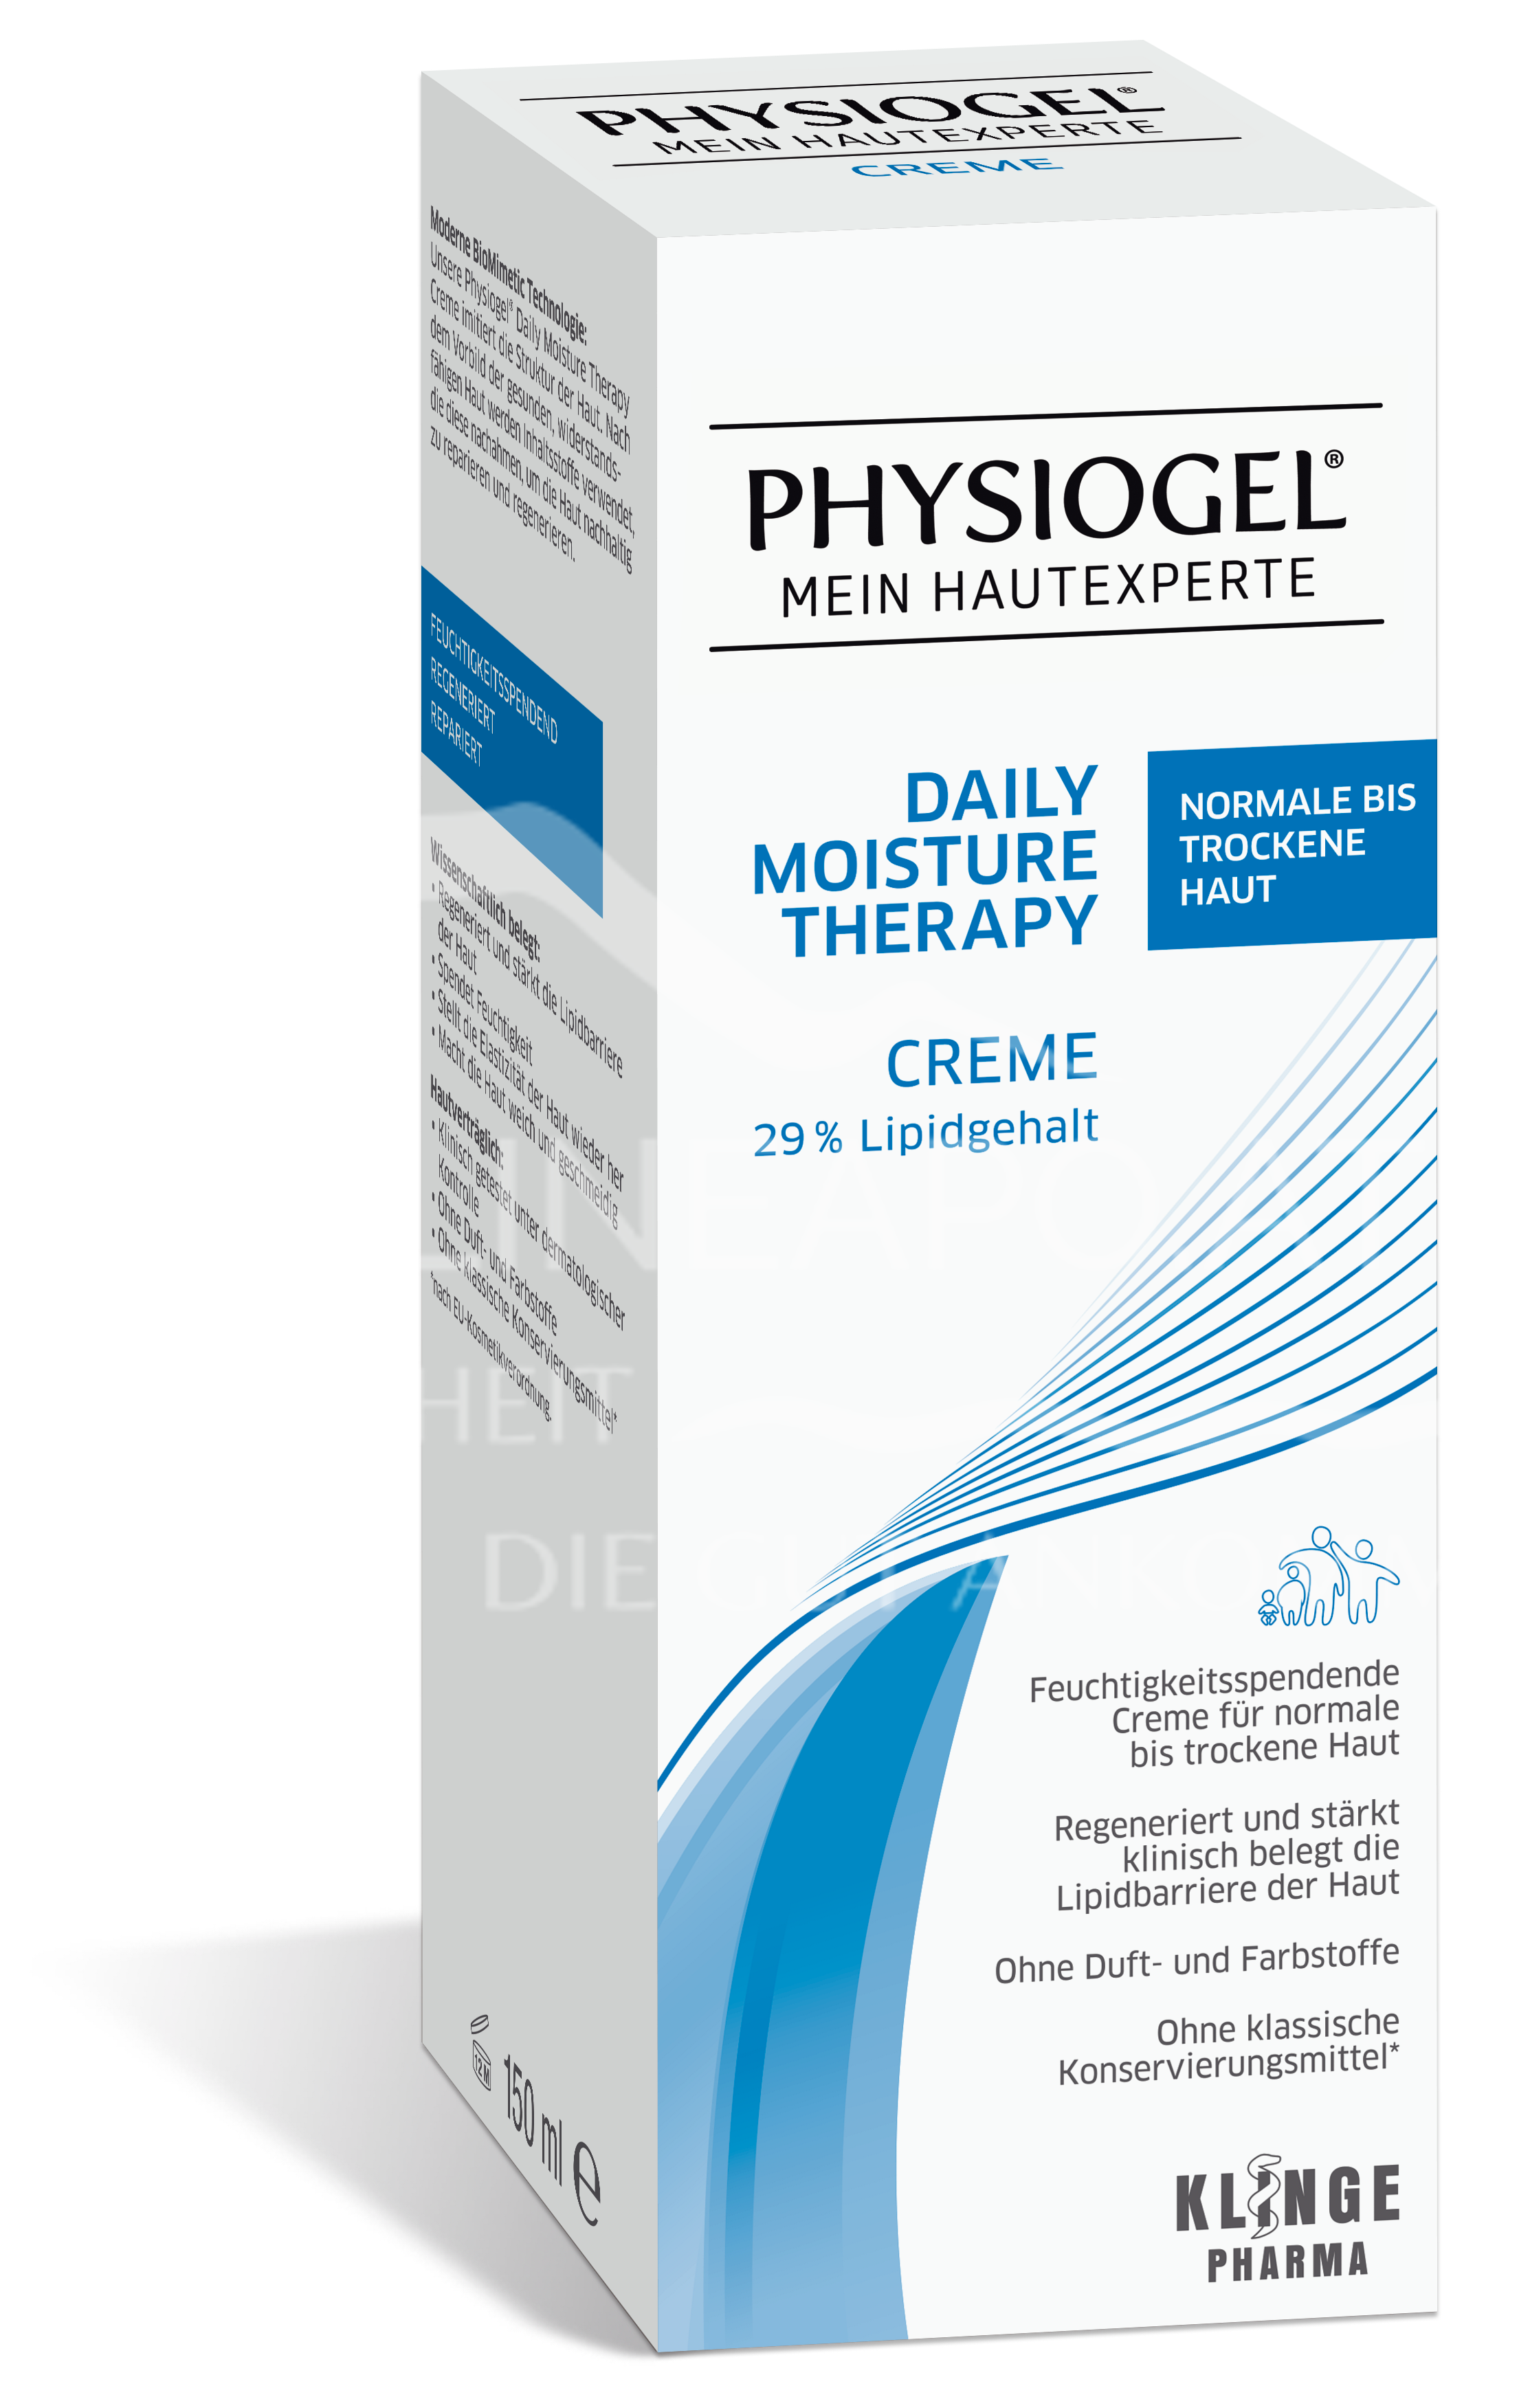 Physiogel® Daily Moisture Therapy Creme - Normale bis trockene Haut